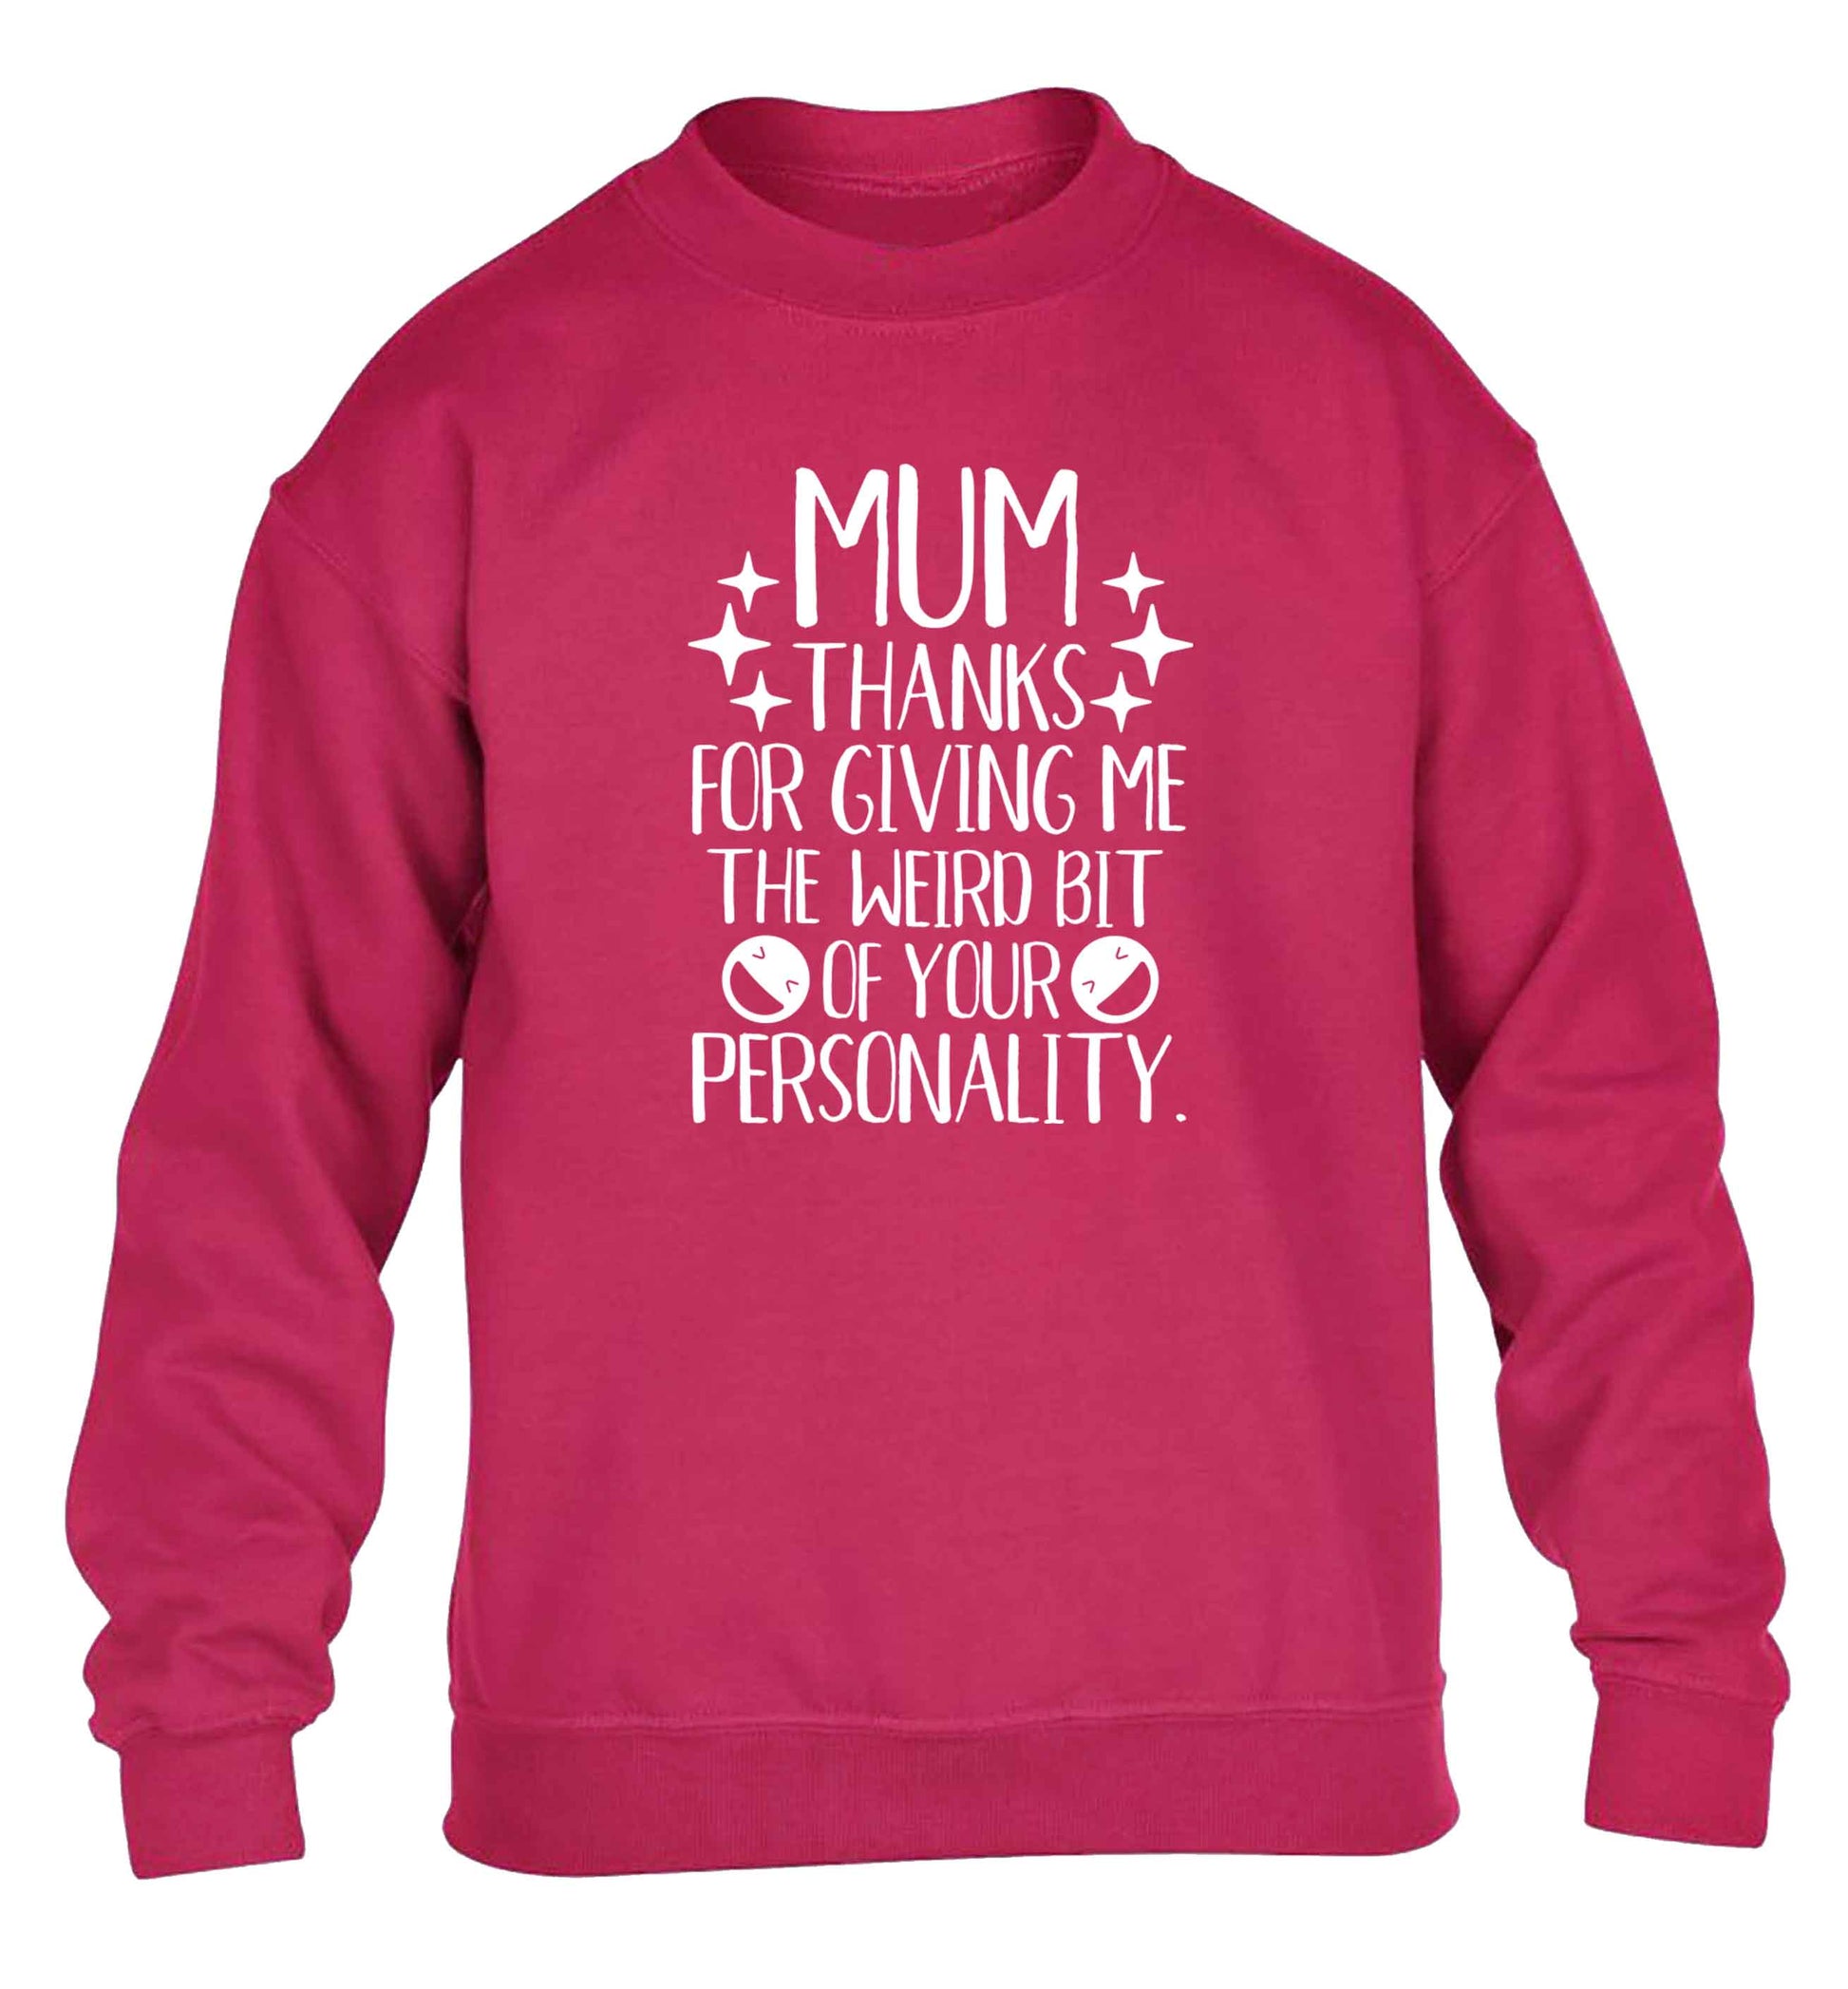 Mum thanks for giving me the weird bit of your personality children's pink sweater 12-13 Years